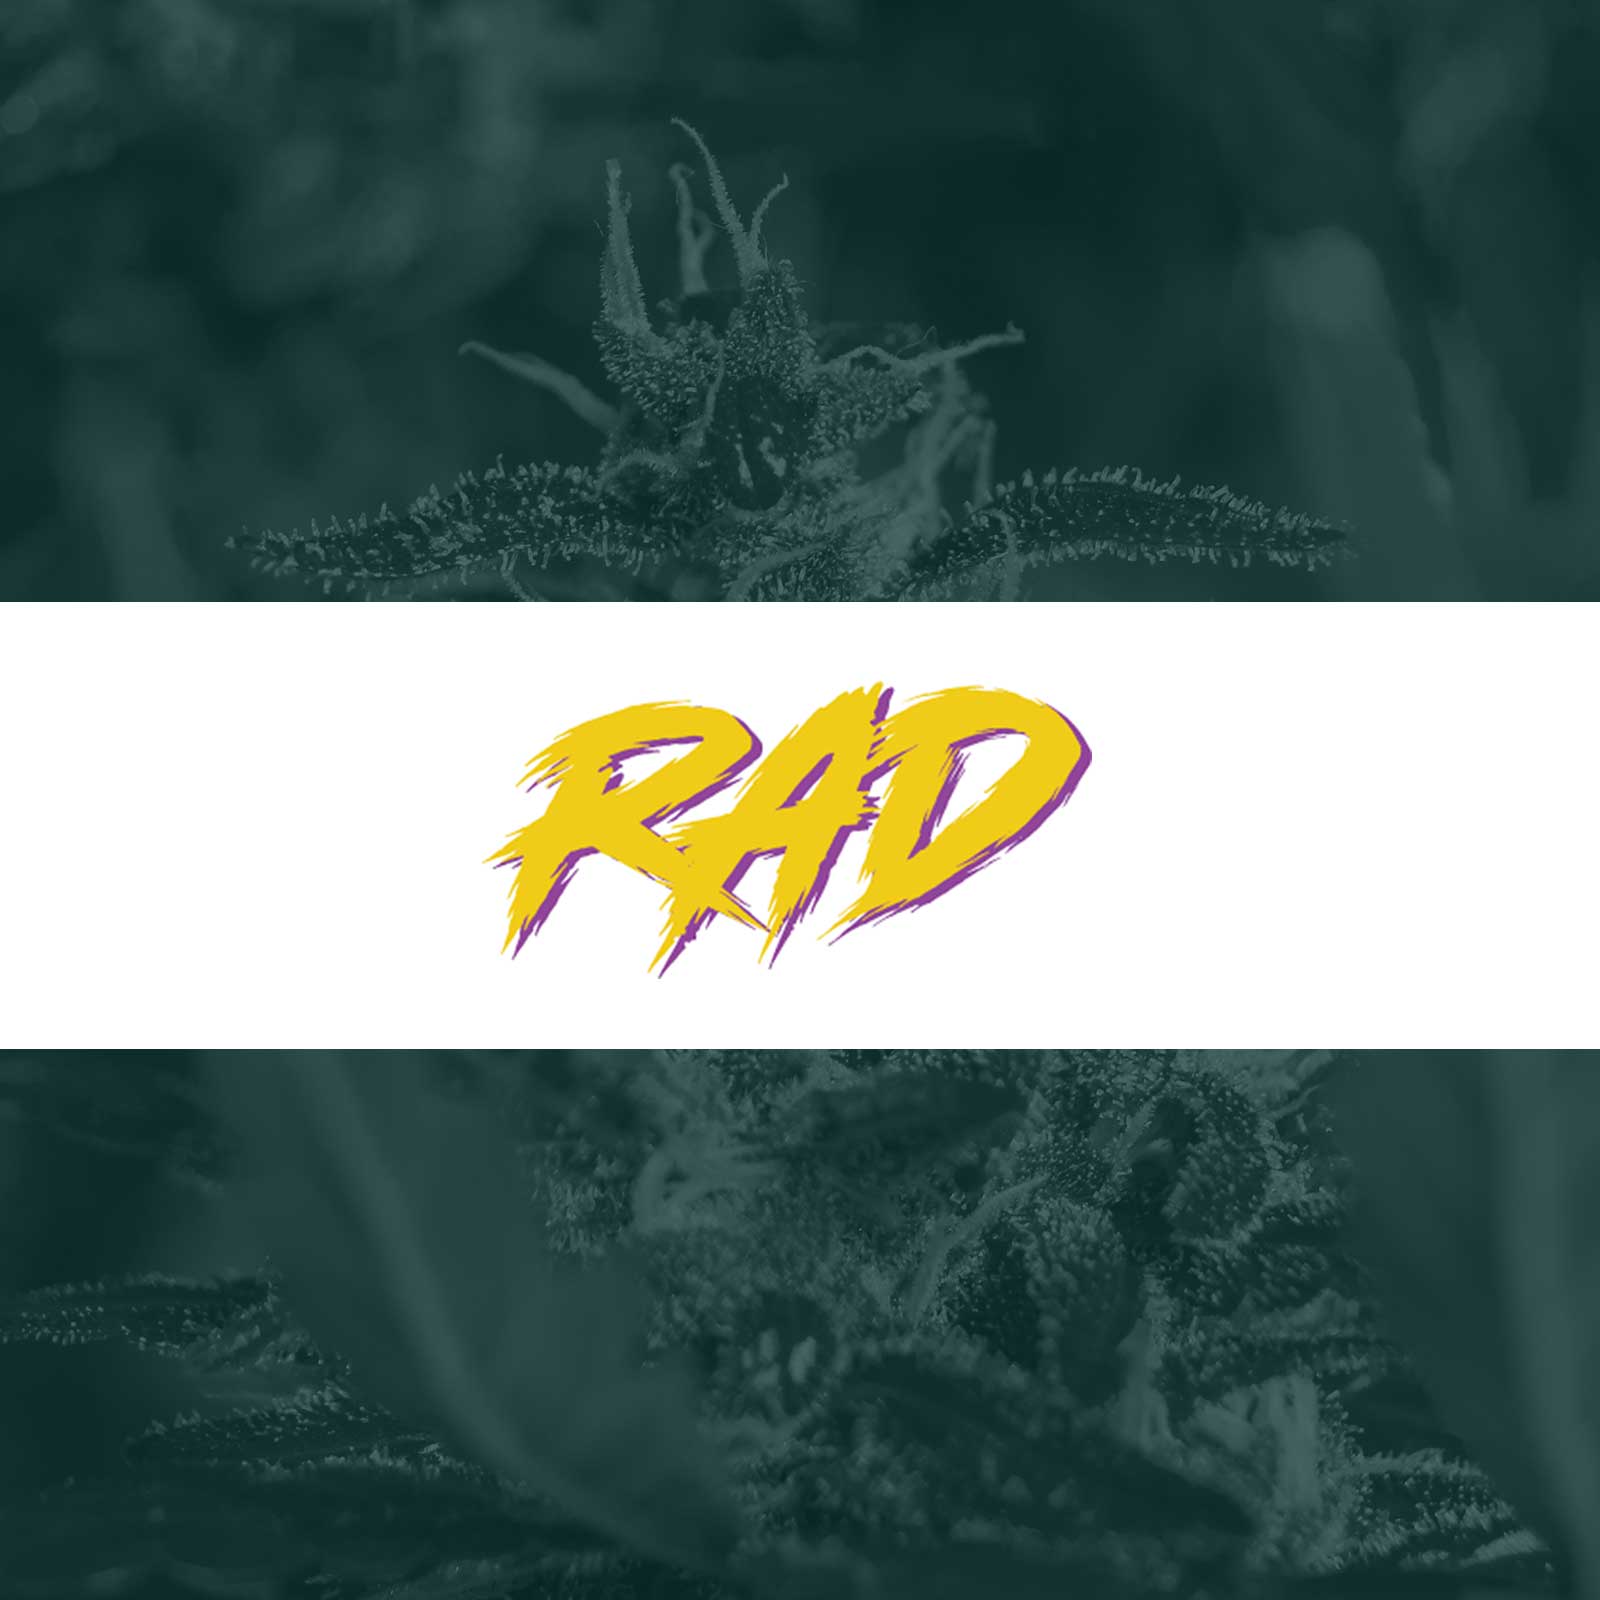 RAD (Really Awesome Dope)